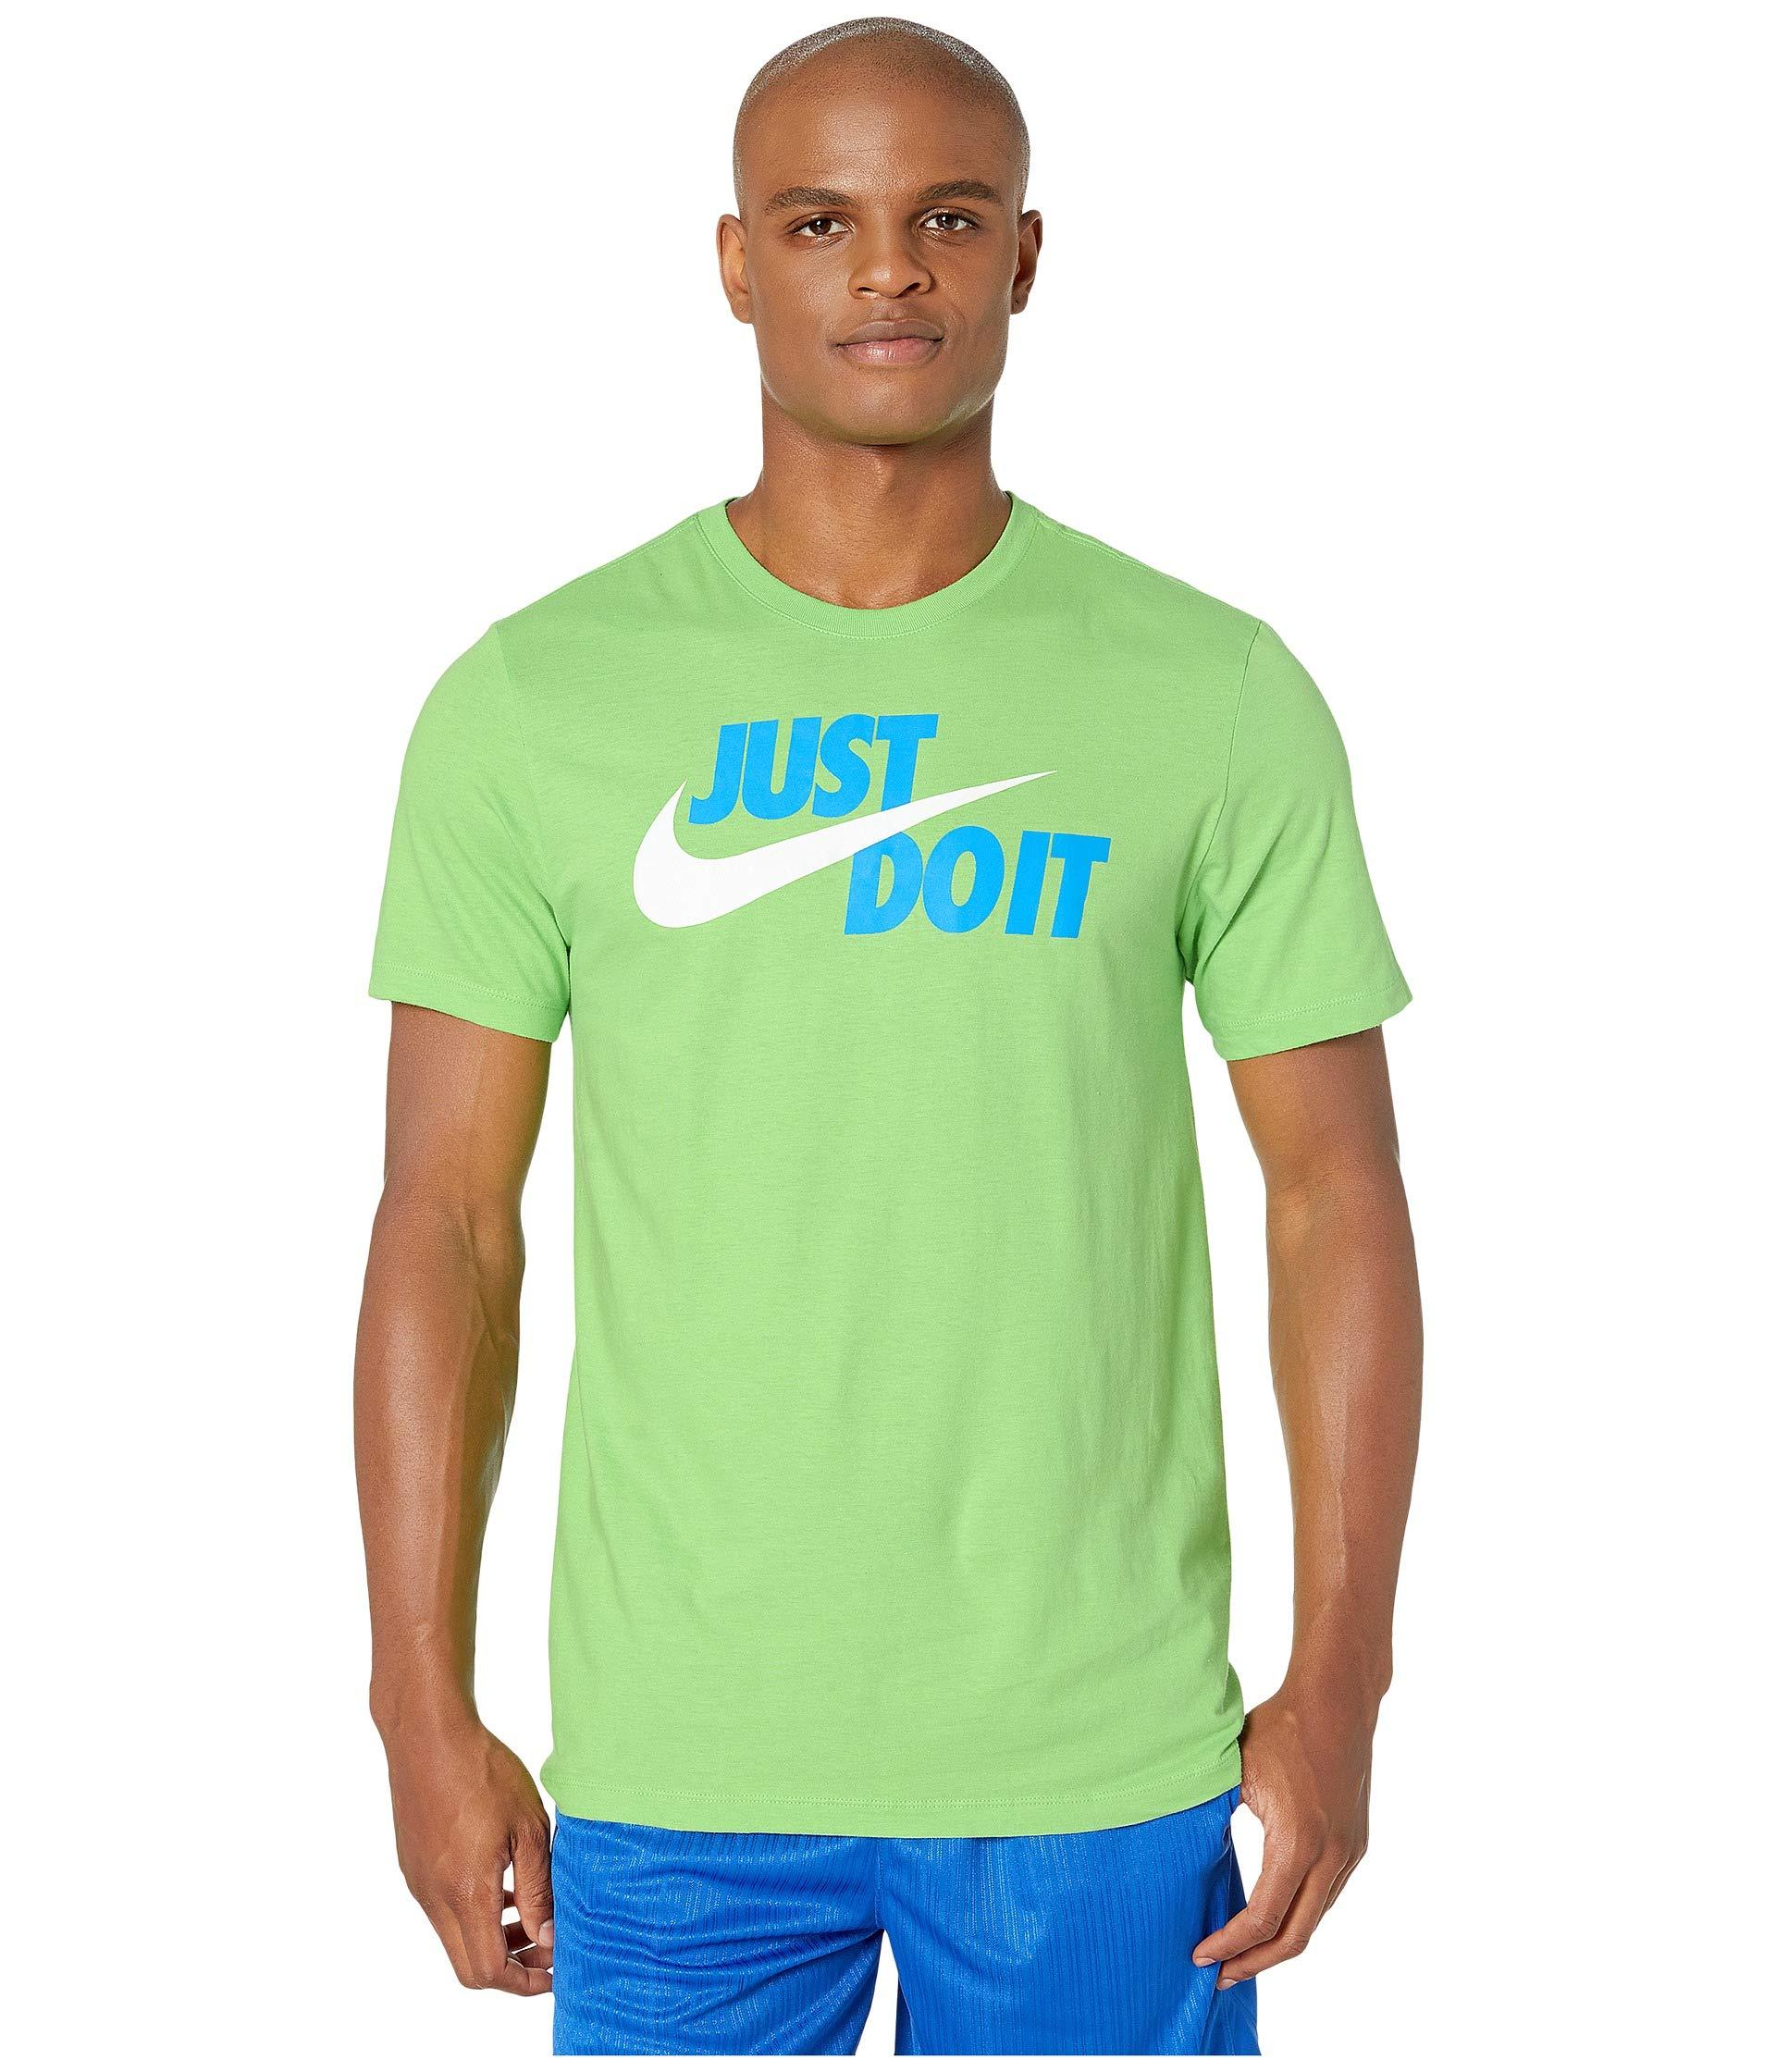 Nike Cotton Nsw Just Do It Swoosh Tee in Green for Men - Lyst